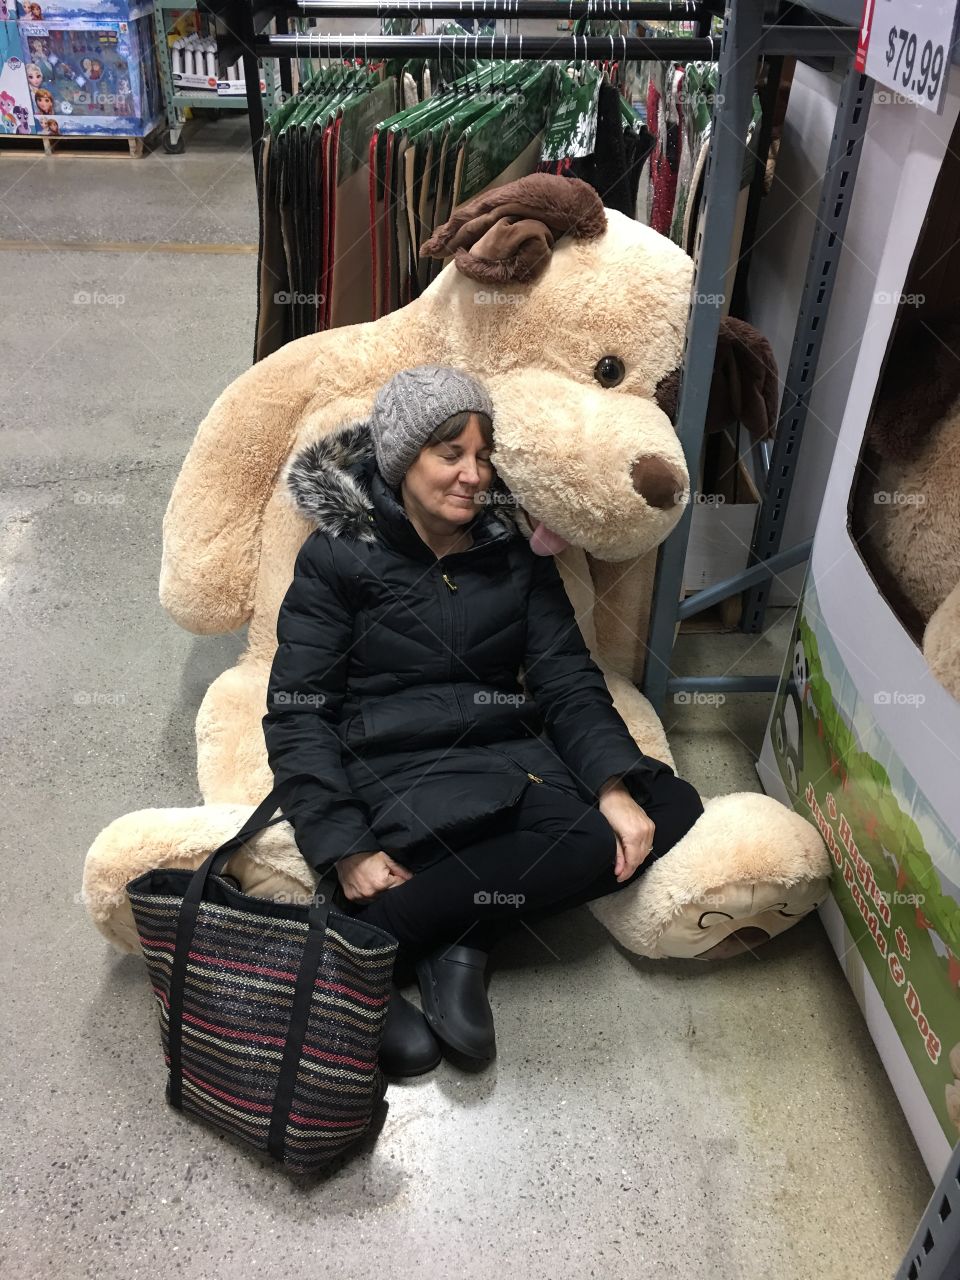 Woman with a giant stuffed animal